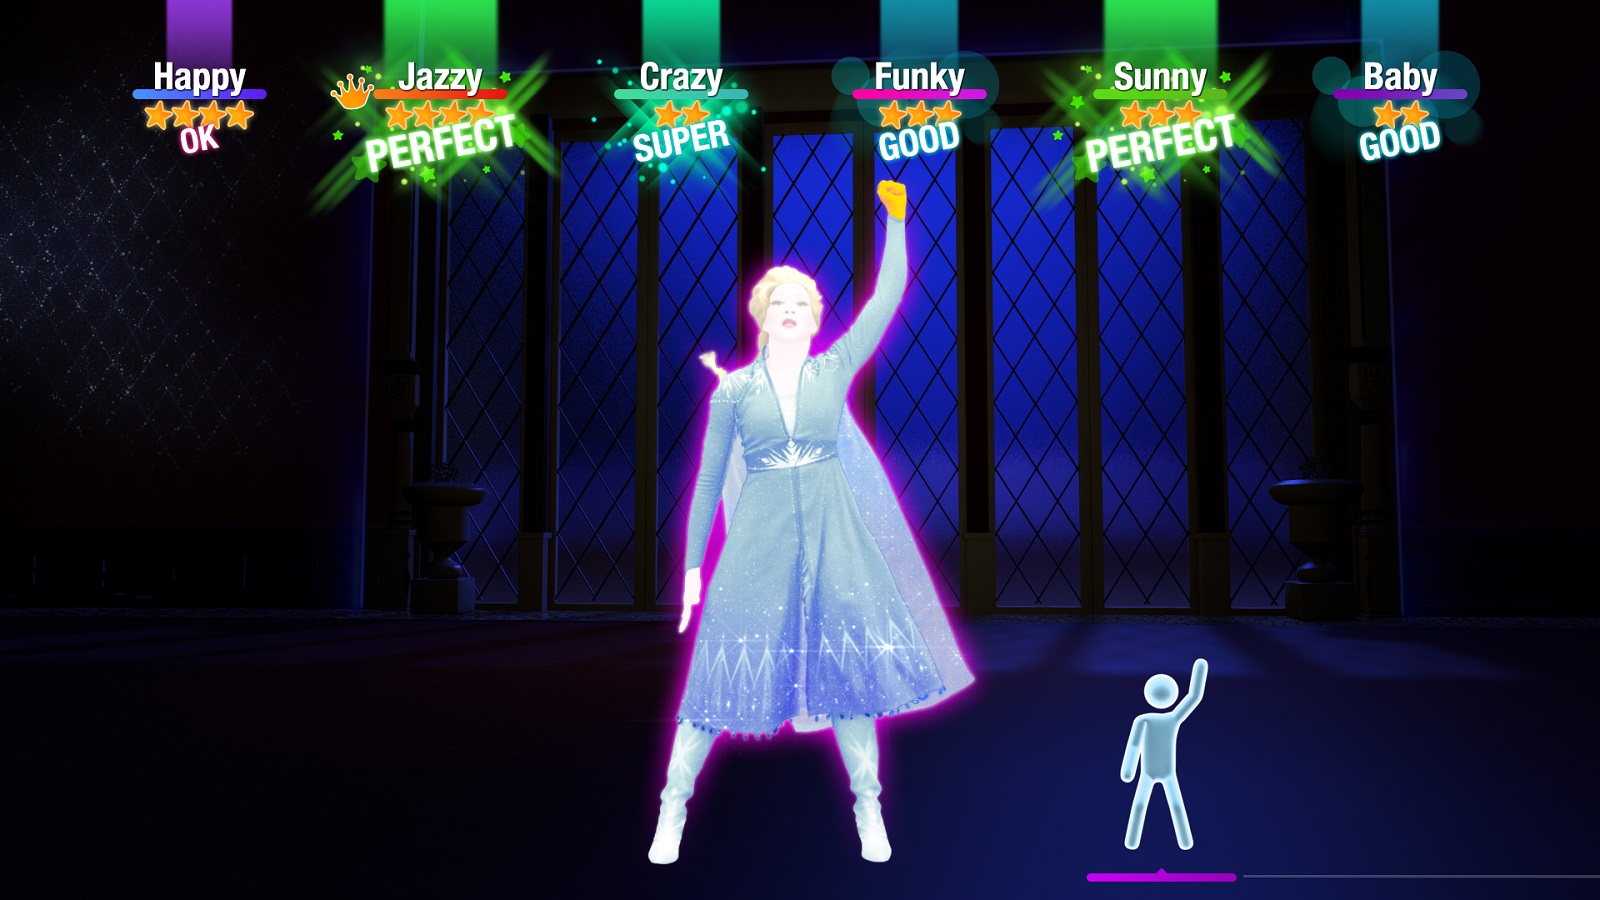 just dance 2020 wii into the unknown